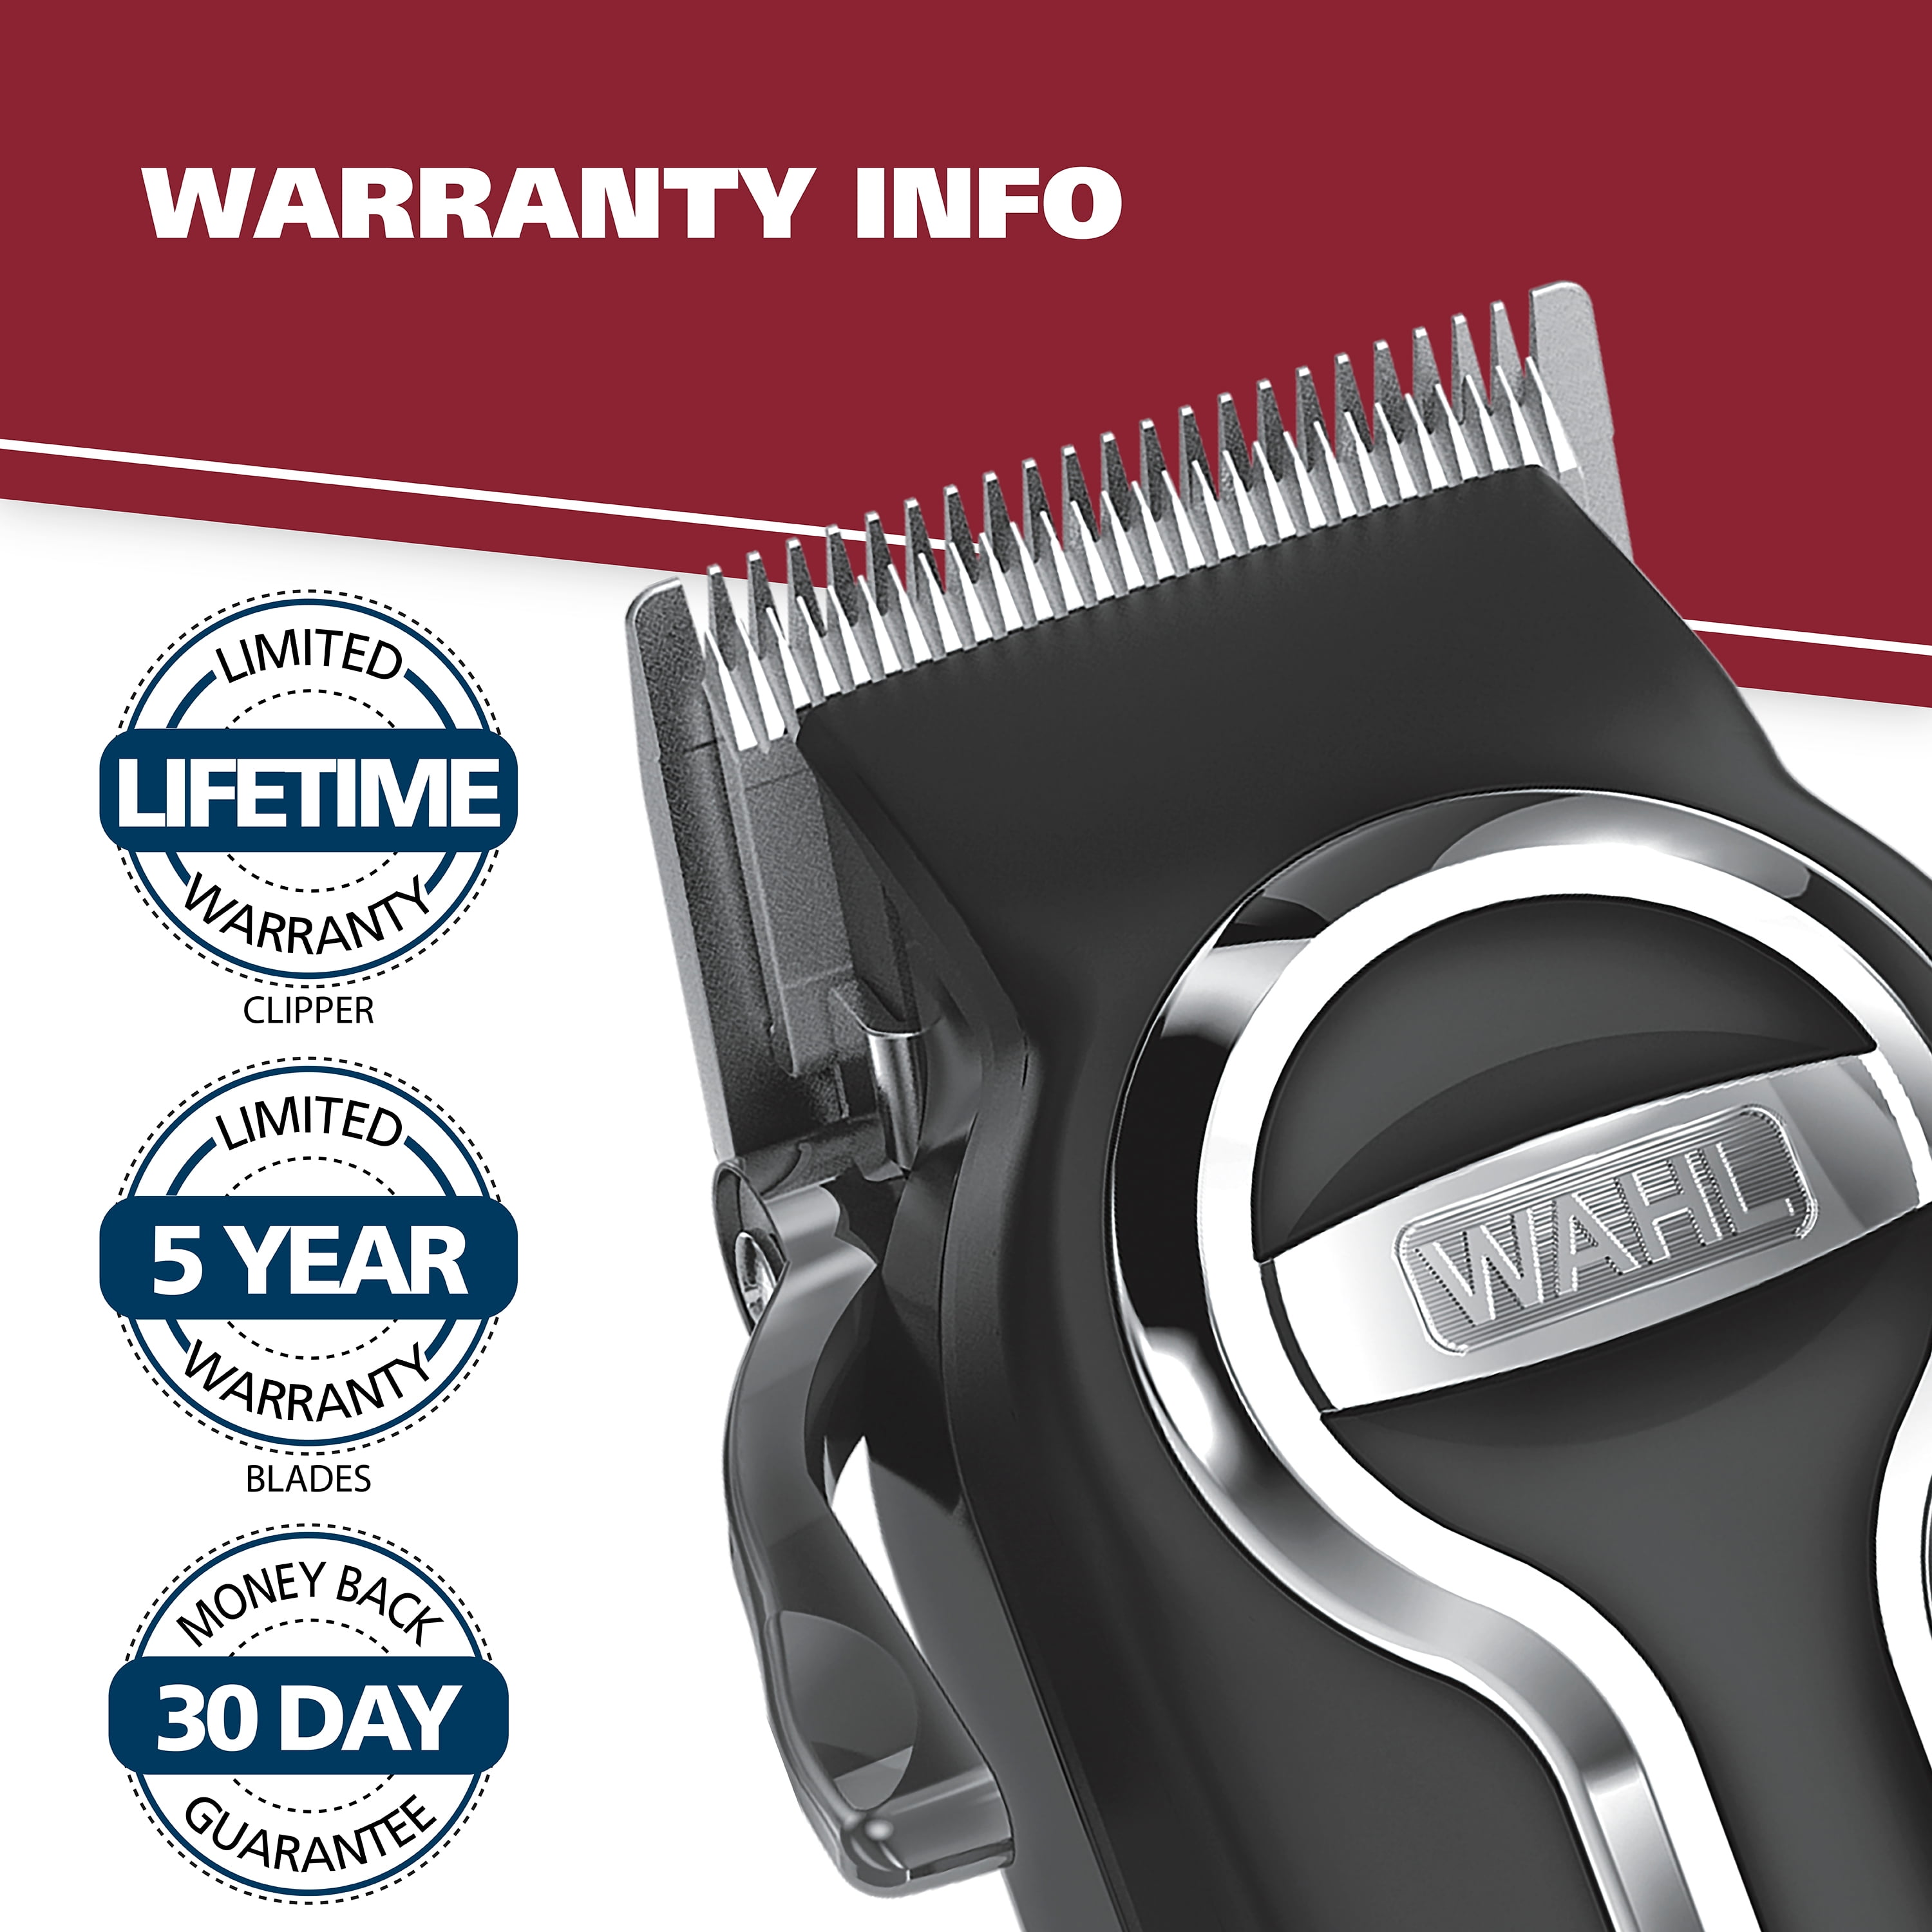 wahl clipper elite pro high performance haircutting kit 79734